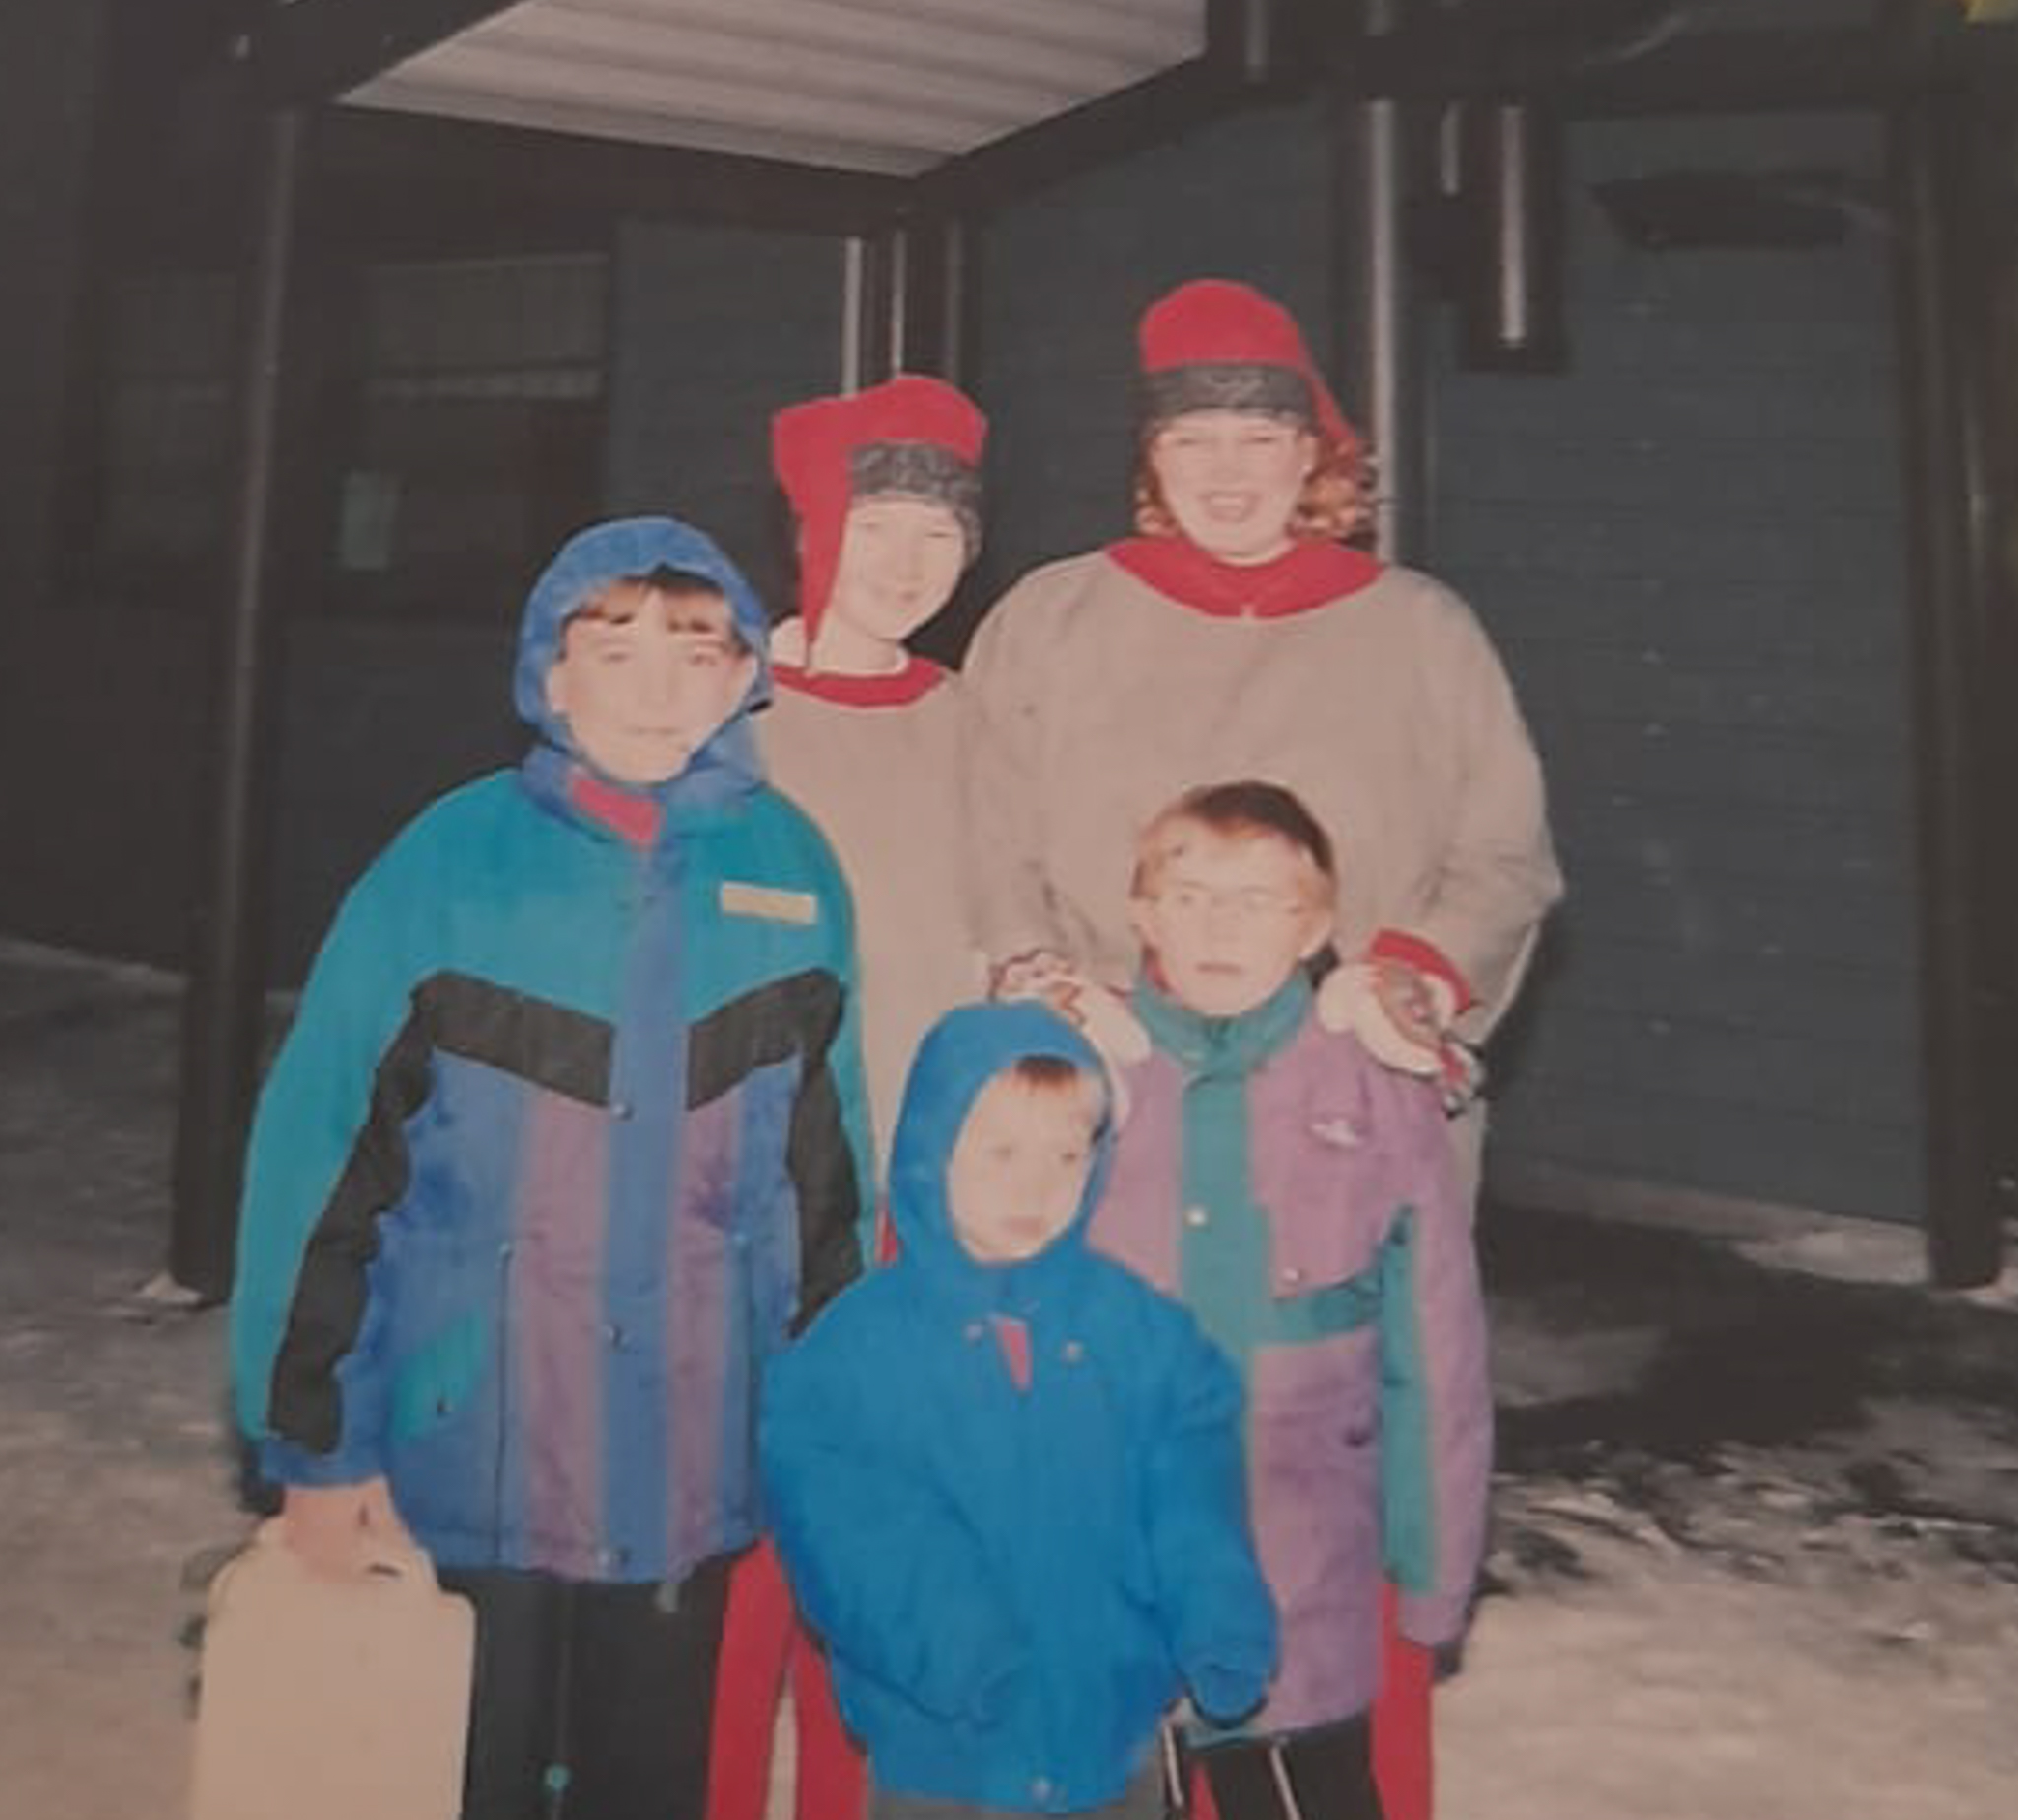 Image shows 3 children in winter clothing stood with to people dressed as elves, there is snow on the ground